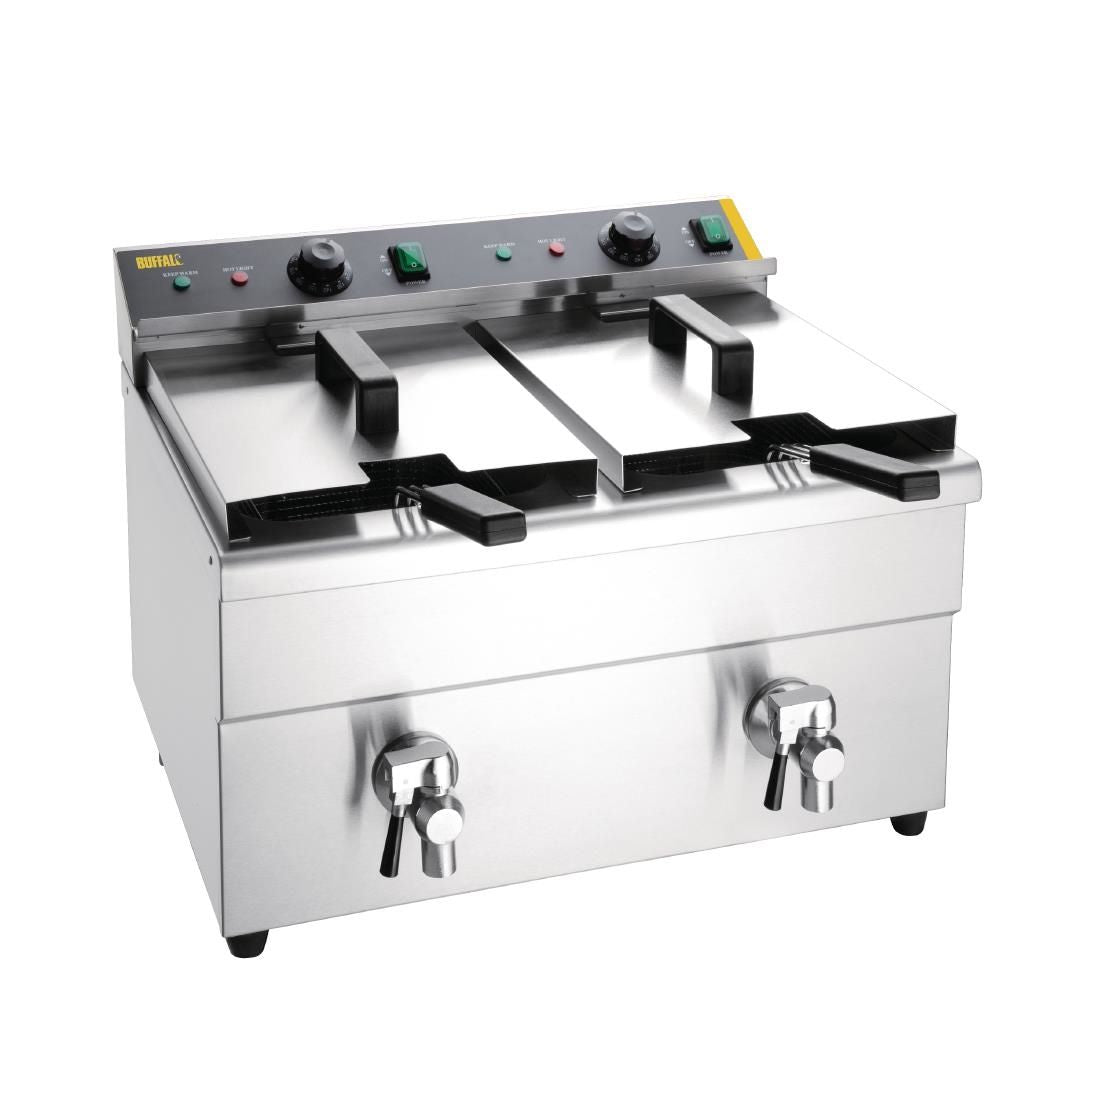 CT012 Buffalo Twin Tank Induction Fryer 2x3kW JD Catering Equipment Solutions Ltd